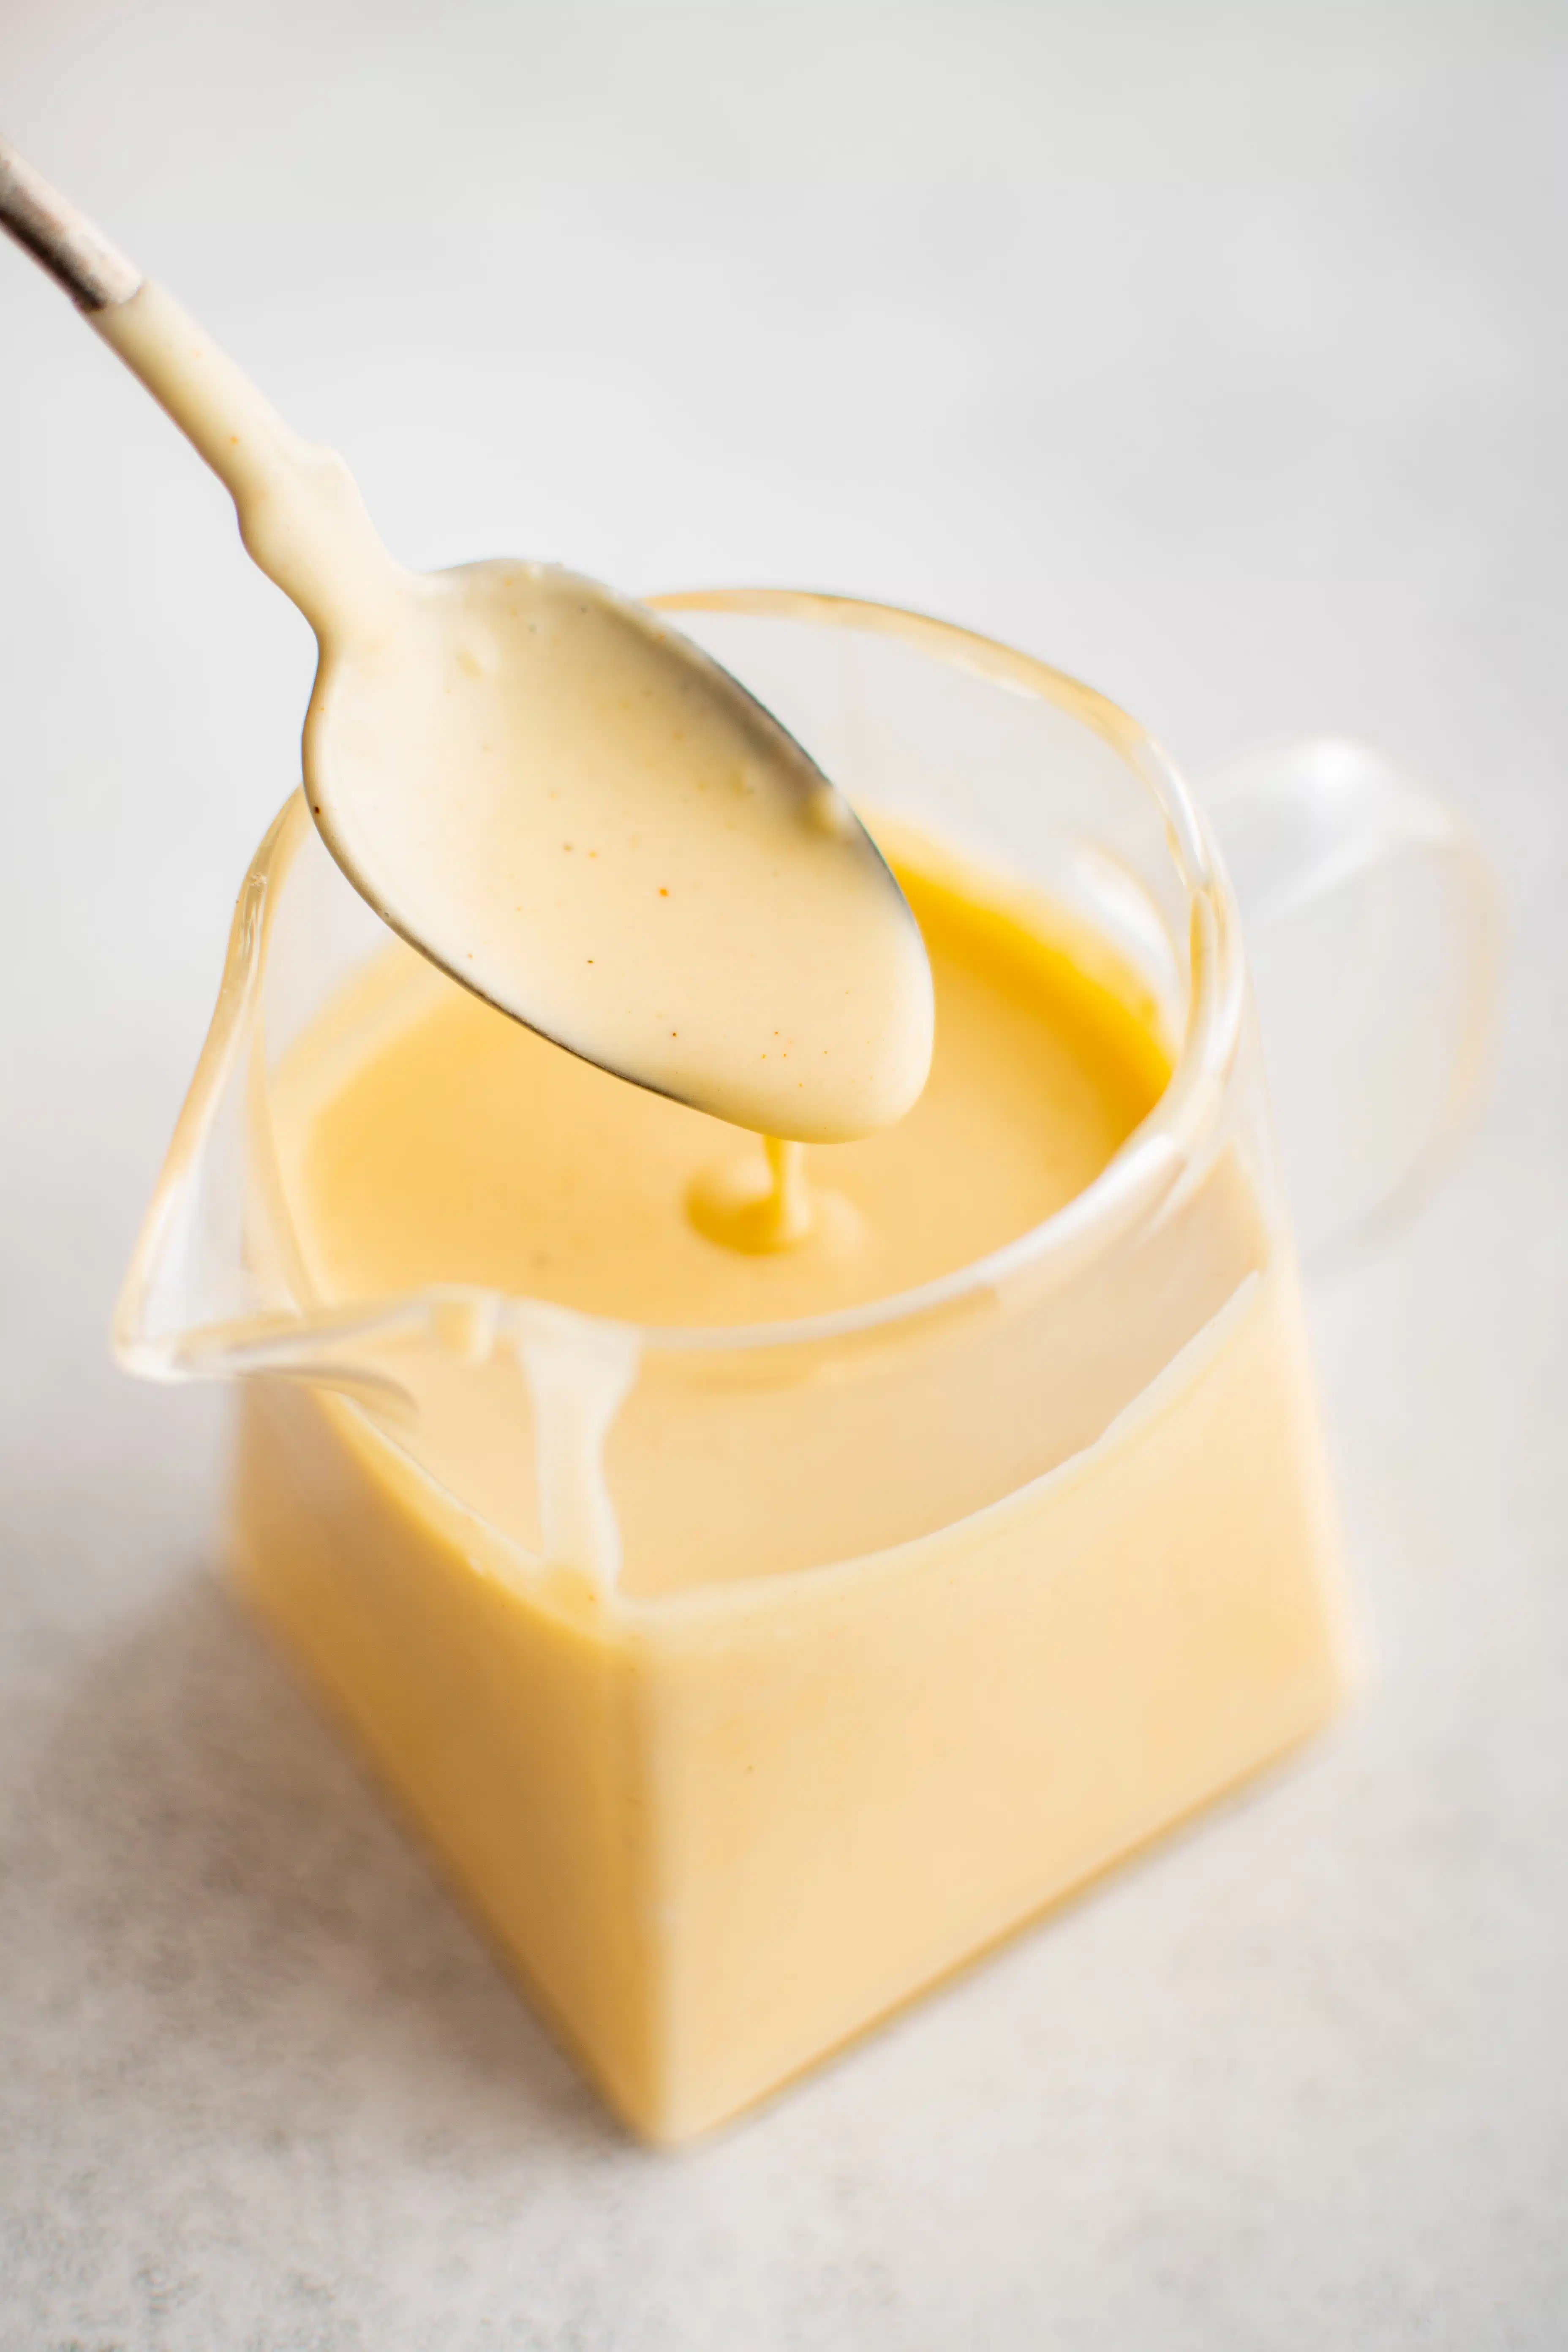 Small glass jar filled with homemade hollandaise sauce with a small spoon filled with hollandaise sauce hovering above.